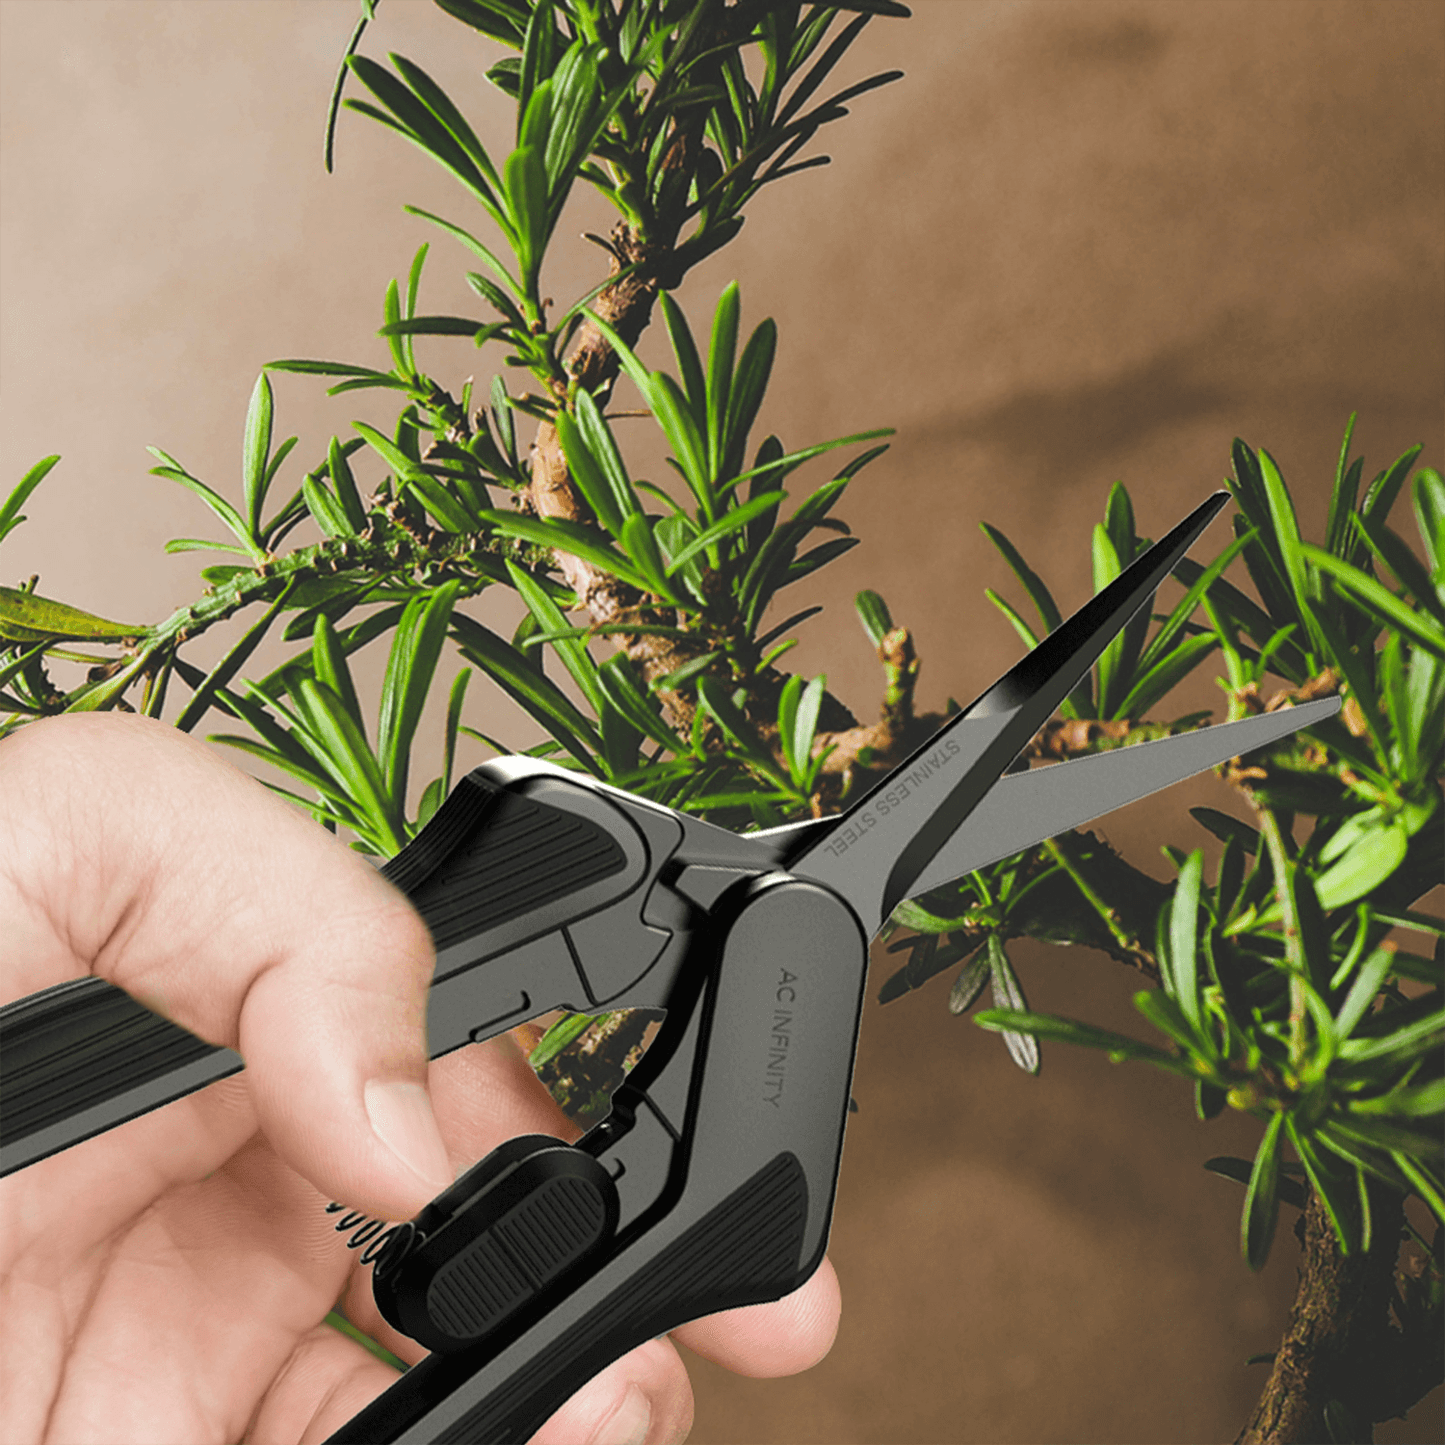 AC Infinity Stainless Steel Pruning Shear, Ergonomic Lightweight, 6.6" Straight Blades AC-PSA3 Harvest & Extraction